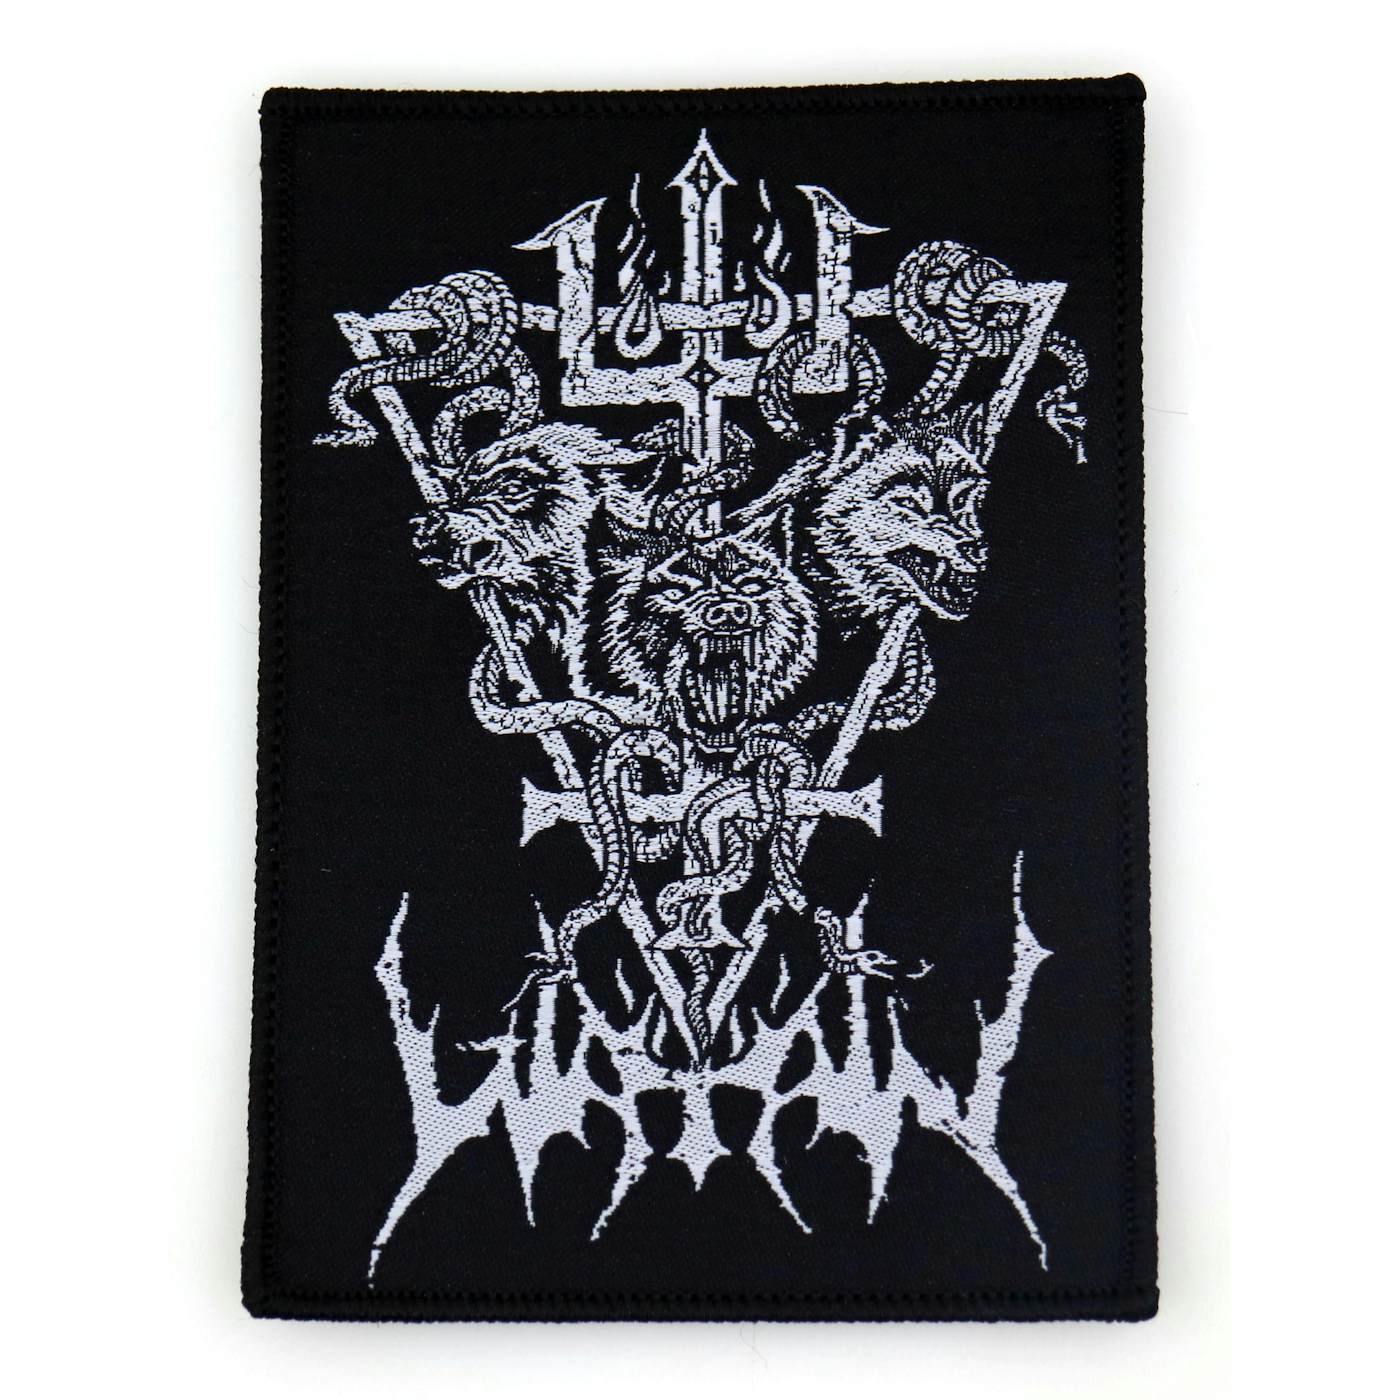 Watain "Snakes And Wolves" Patch